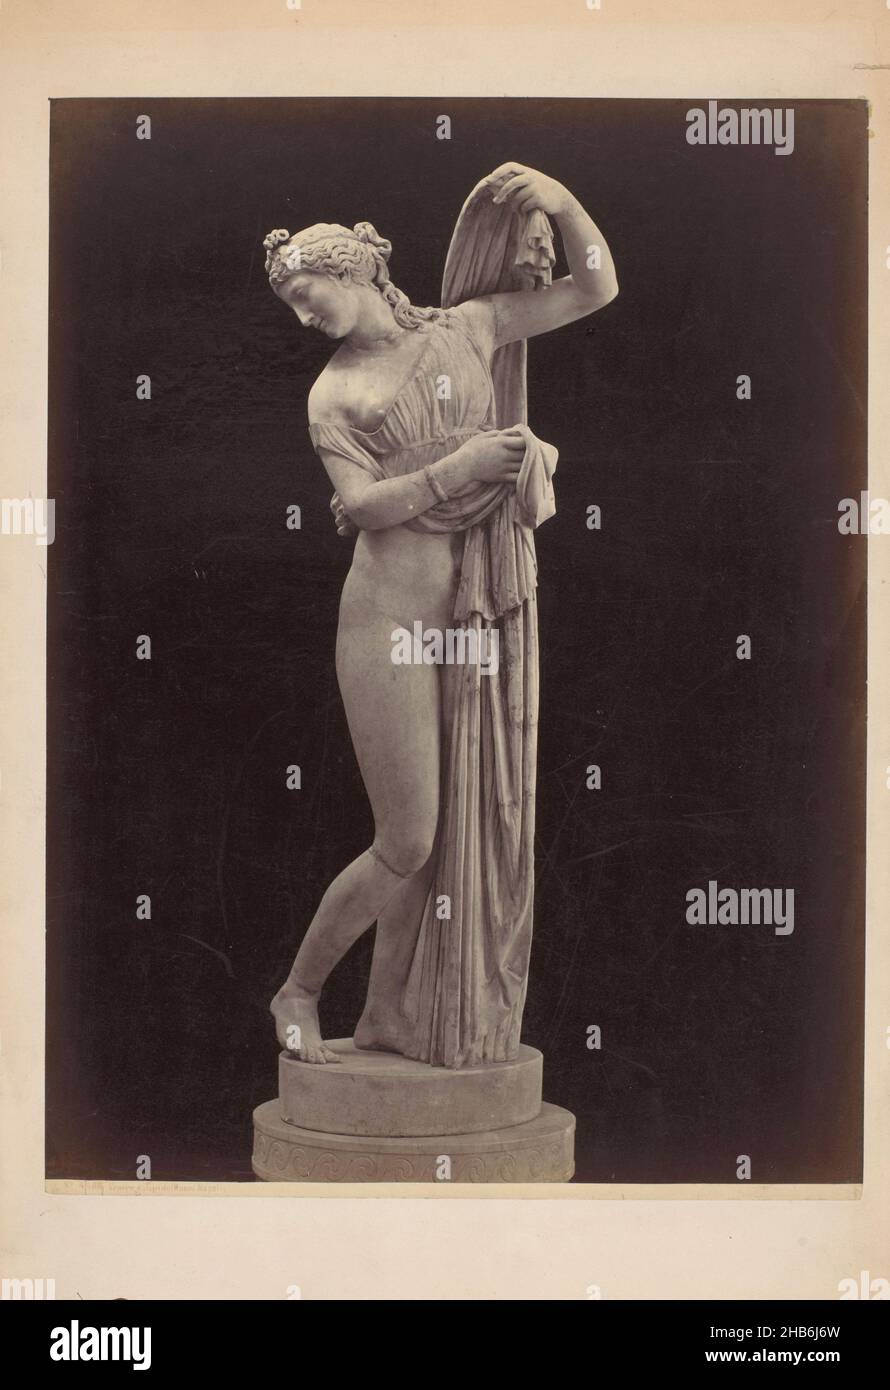 Venus Callipyge in the Museo Nazionale at Naples, Venere galipide Museo Napoli (title on object), anonymous, Museo Nazionale, c. 1875 - c. 1900, cardboard, albumen print, height 370 mm × width 275 mm Stock Photo